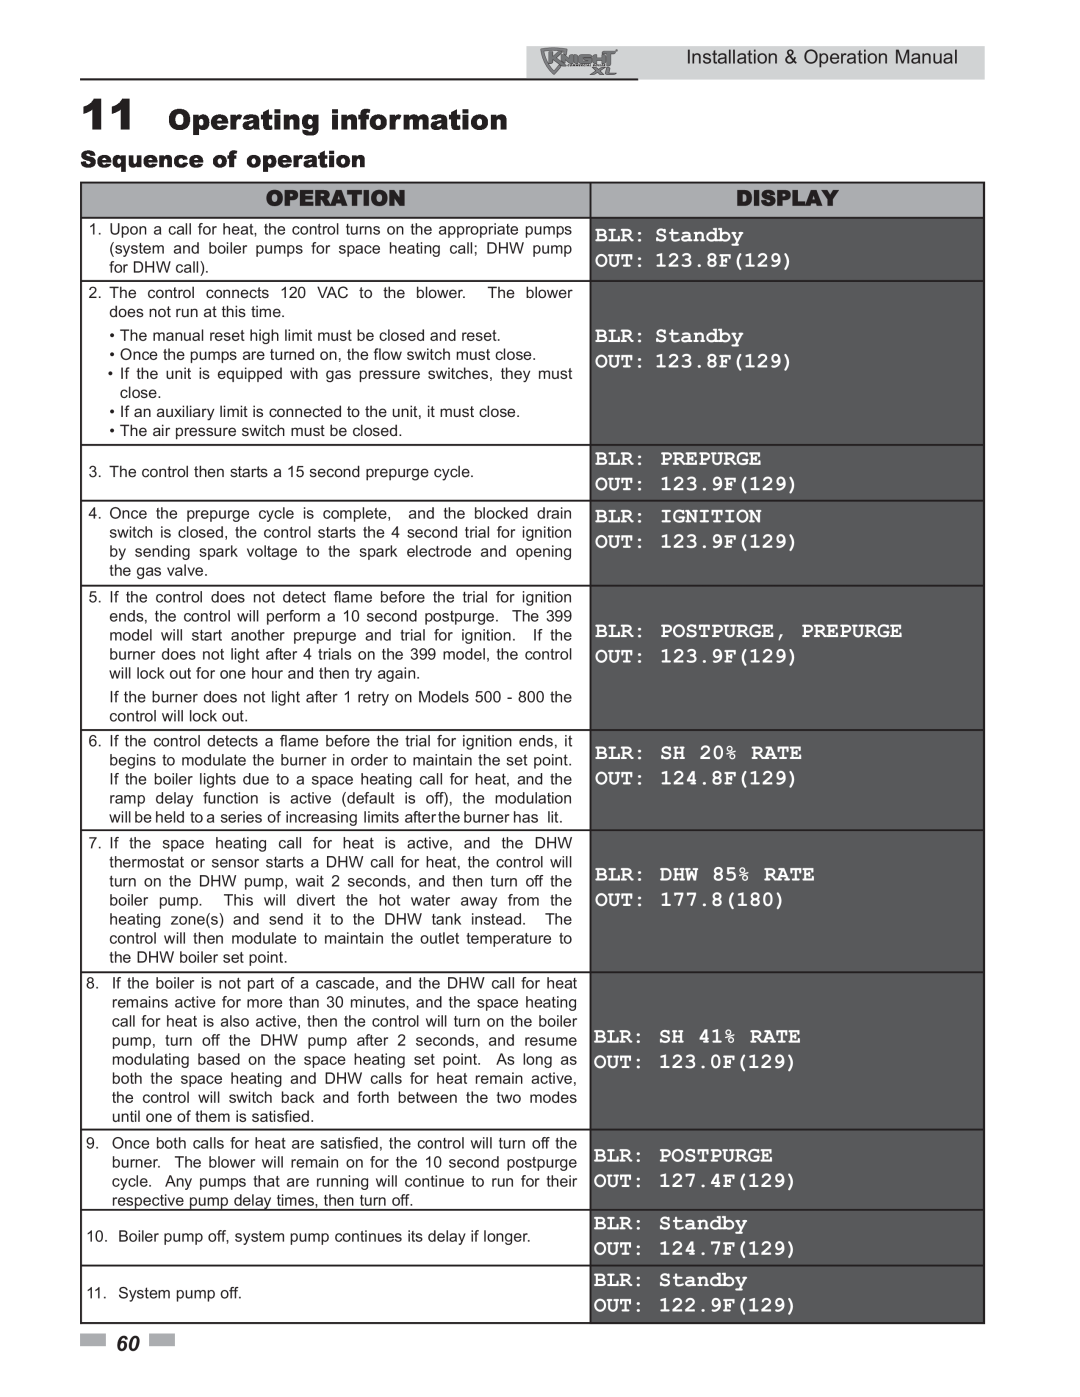 Lochinvar 399 operation manual Sequence of operation, Operation, Display, Operating information 